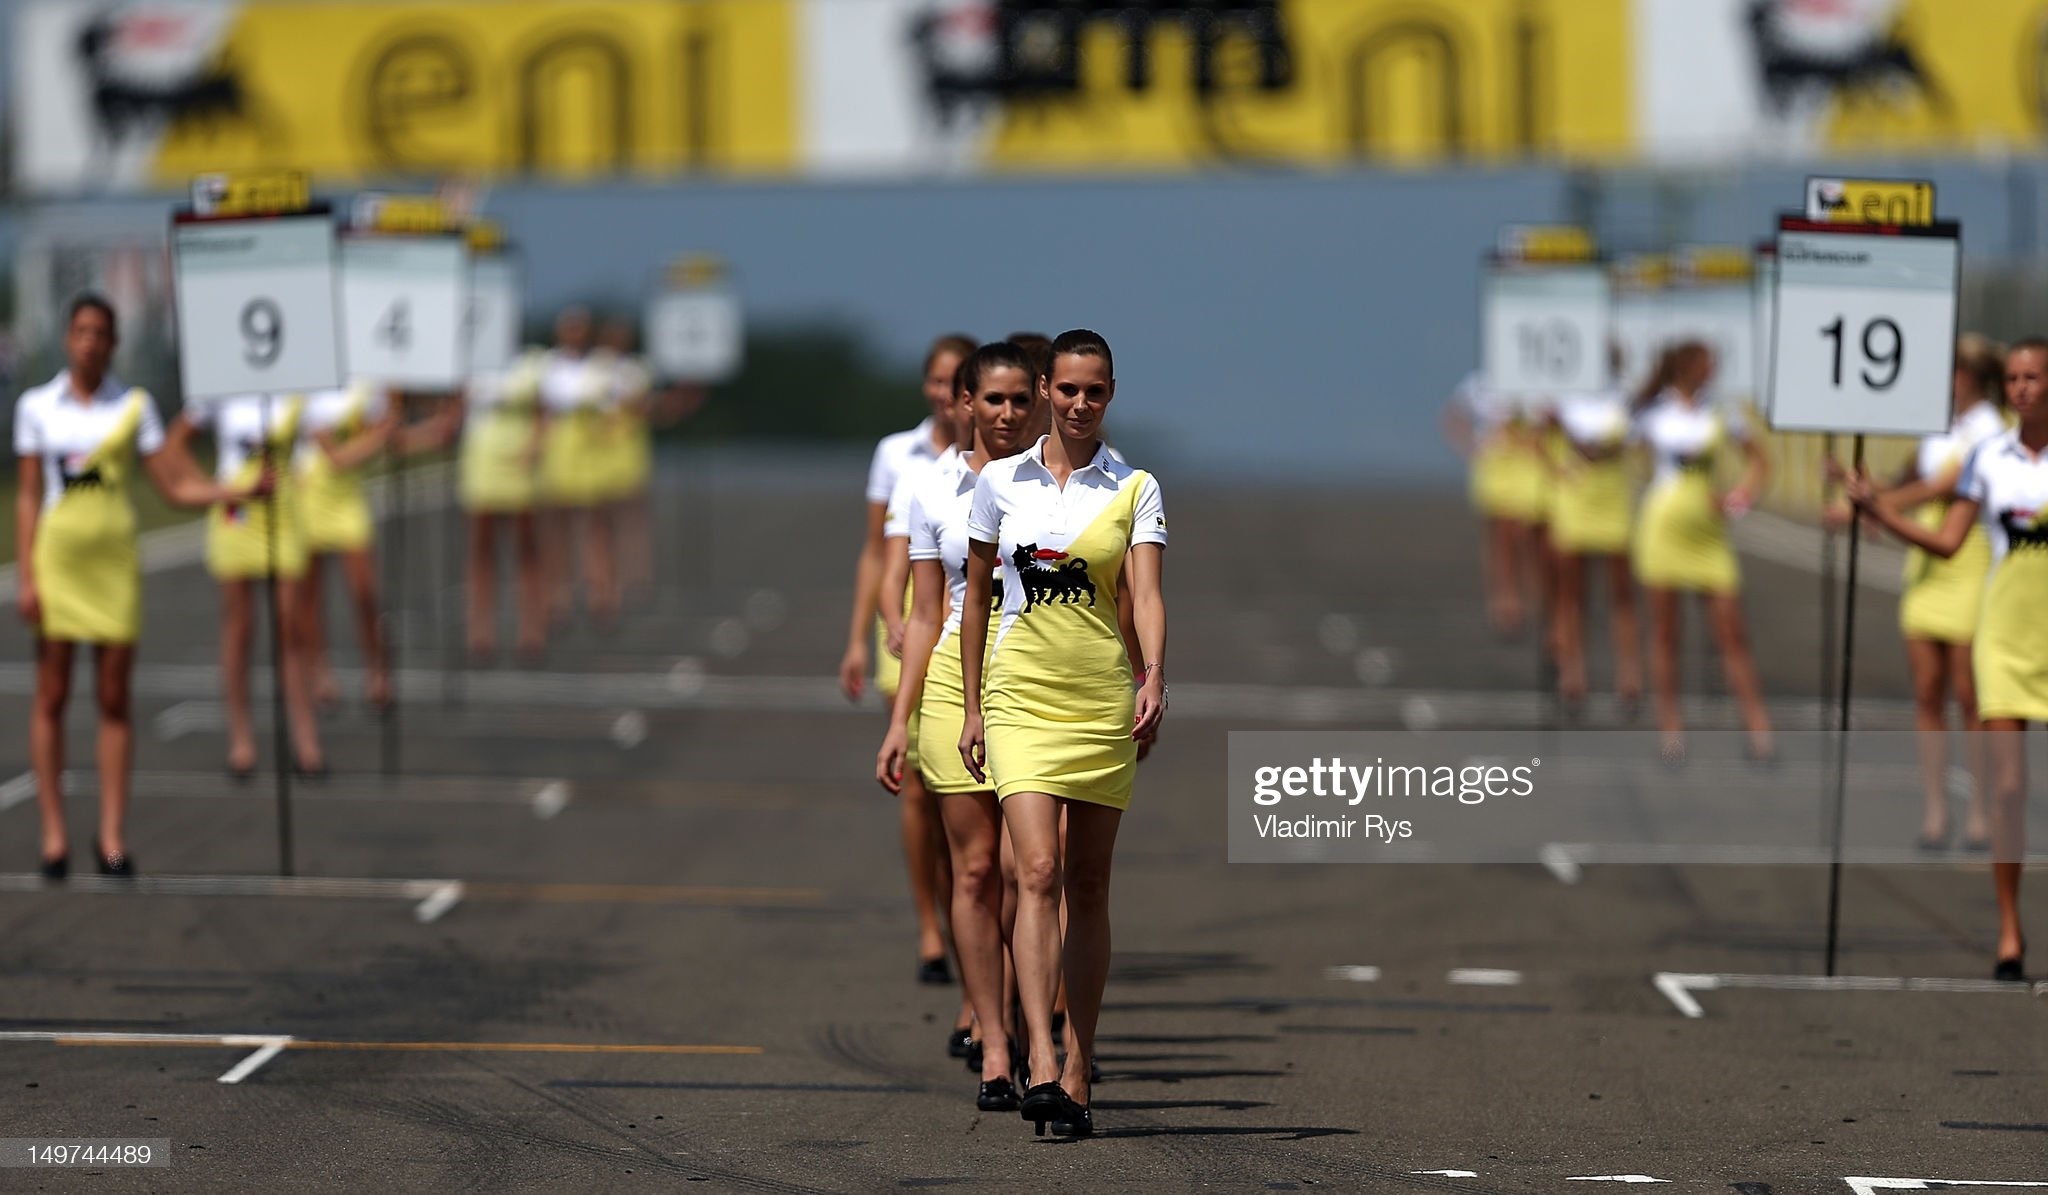 Grid girls are seen after qualifying for the Hungarian Formula One Grand Prix at the Hungaroring on July 28, 2012 in Budapest, Hungary. 